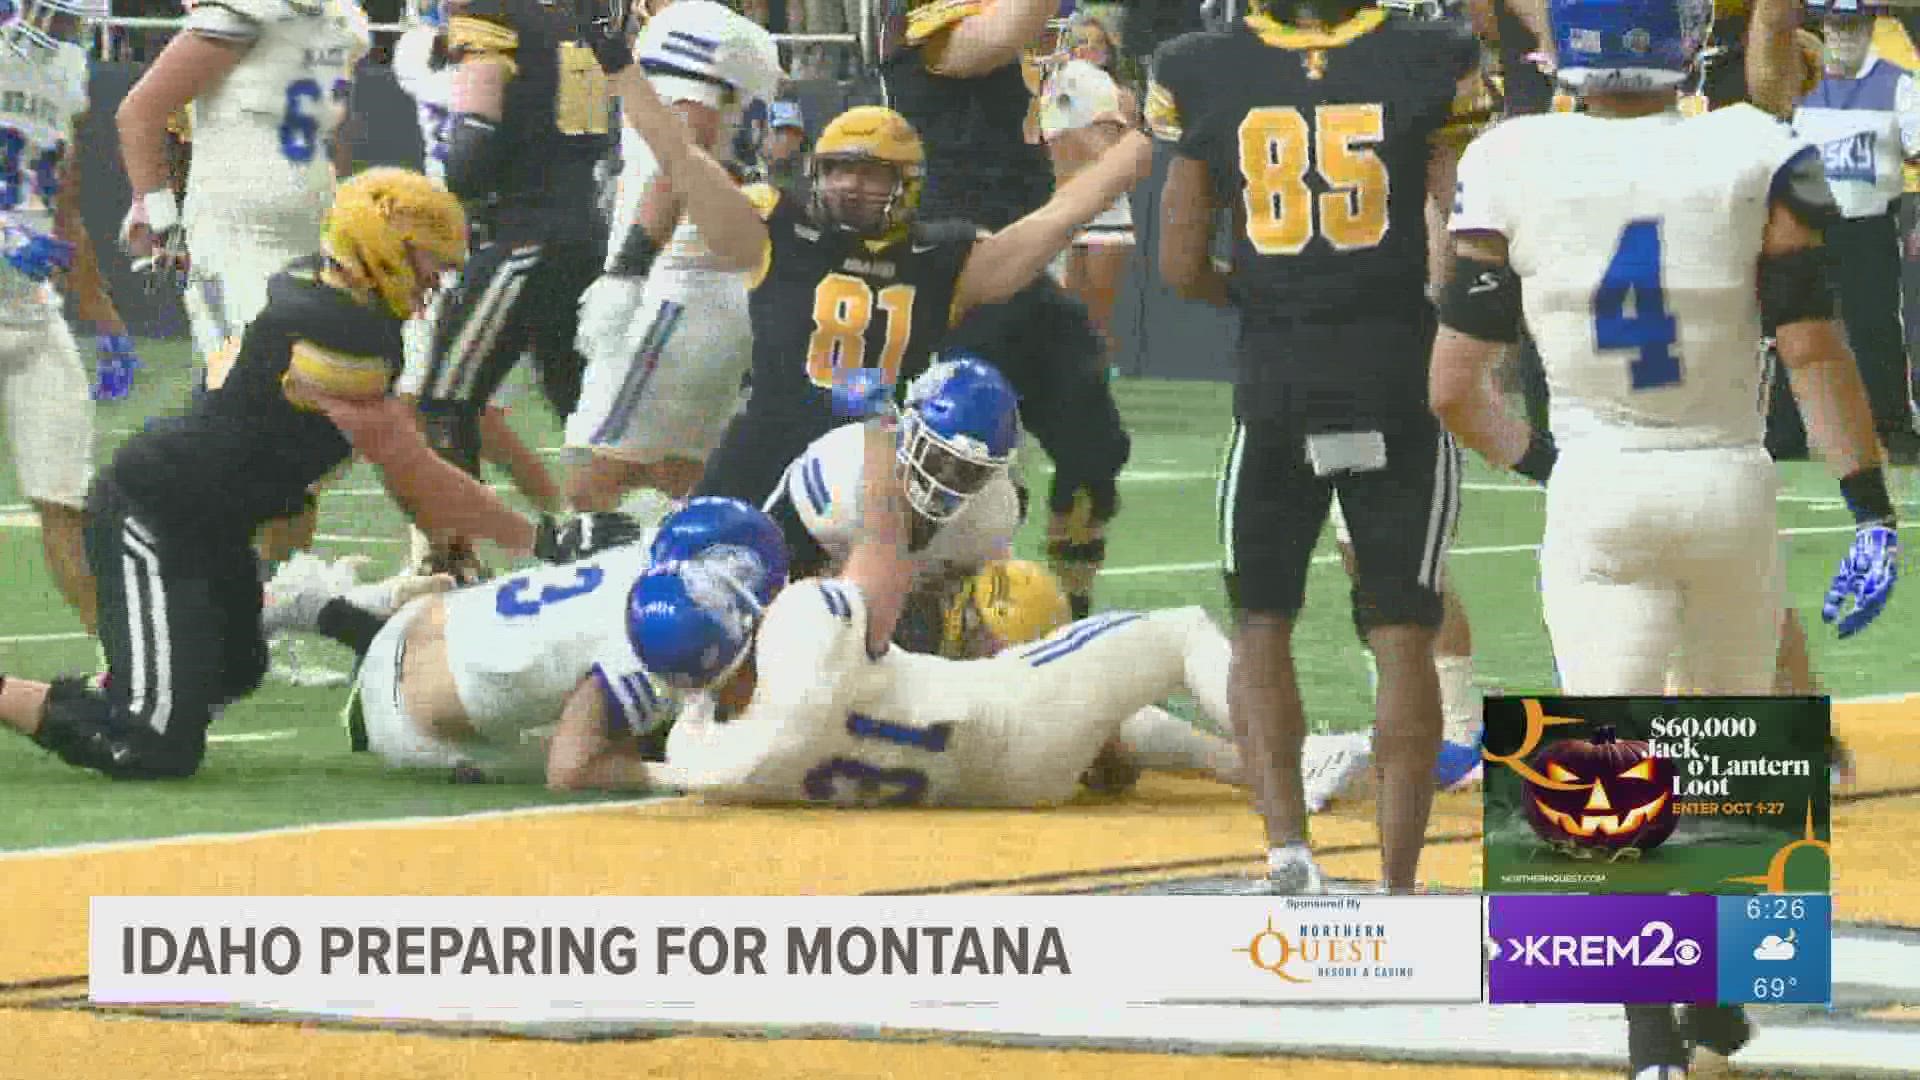 Head Coach Jason Eck believes Montana will be the toughest test for his Vandals squad all season.